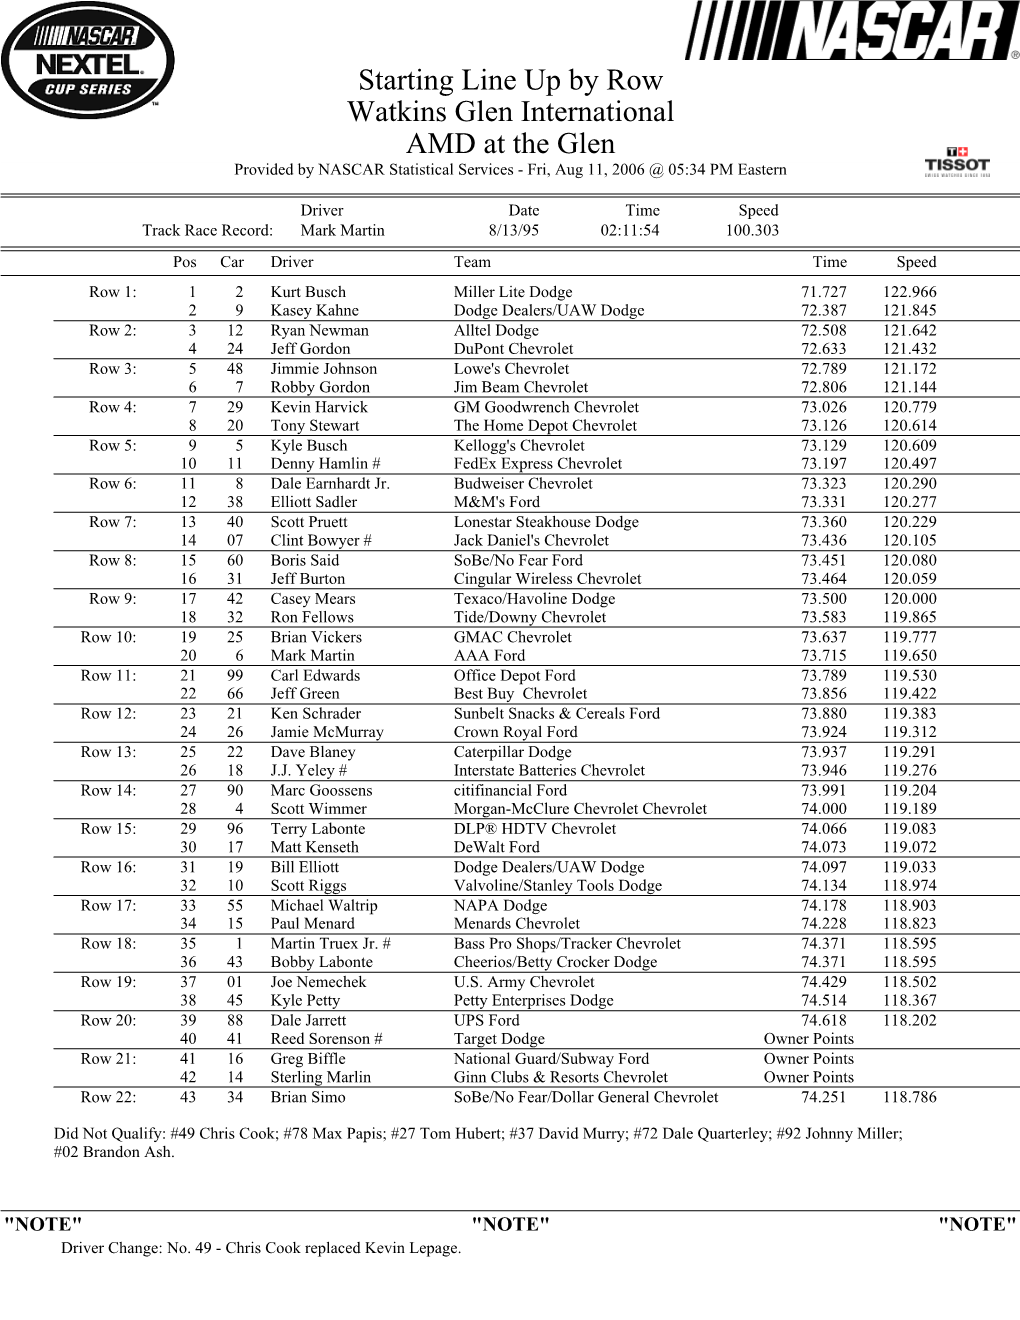 Starting Line up by Row Watkins Glen International AMD at the Glen Provided by NASCAR Statistical Services - Fri, Aug 11, 2006 @ 05:34 PM Eastern